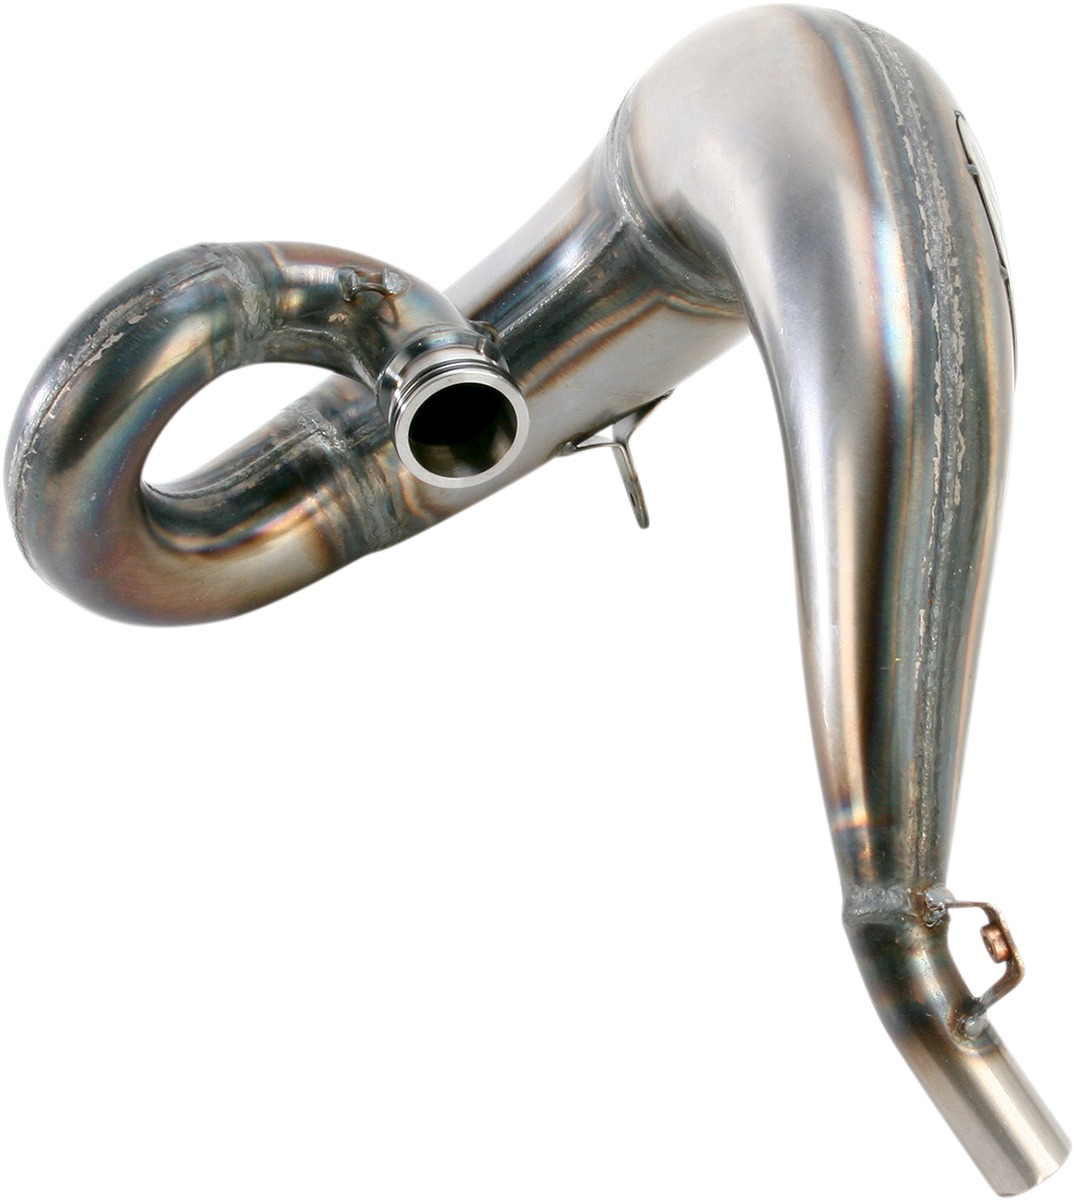 Factory Fatty Expansion Chamber Head Pipe - For 11-16 250-300 2T KTM/Husq/Husa - Click Image to Close